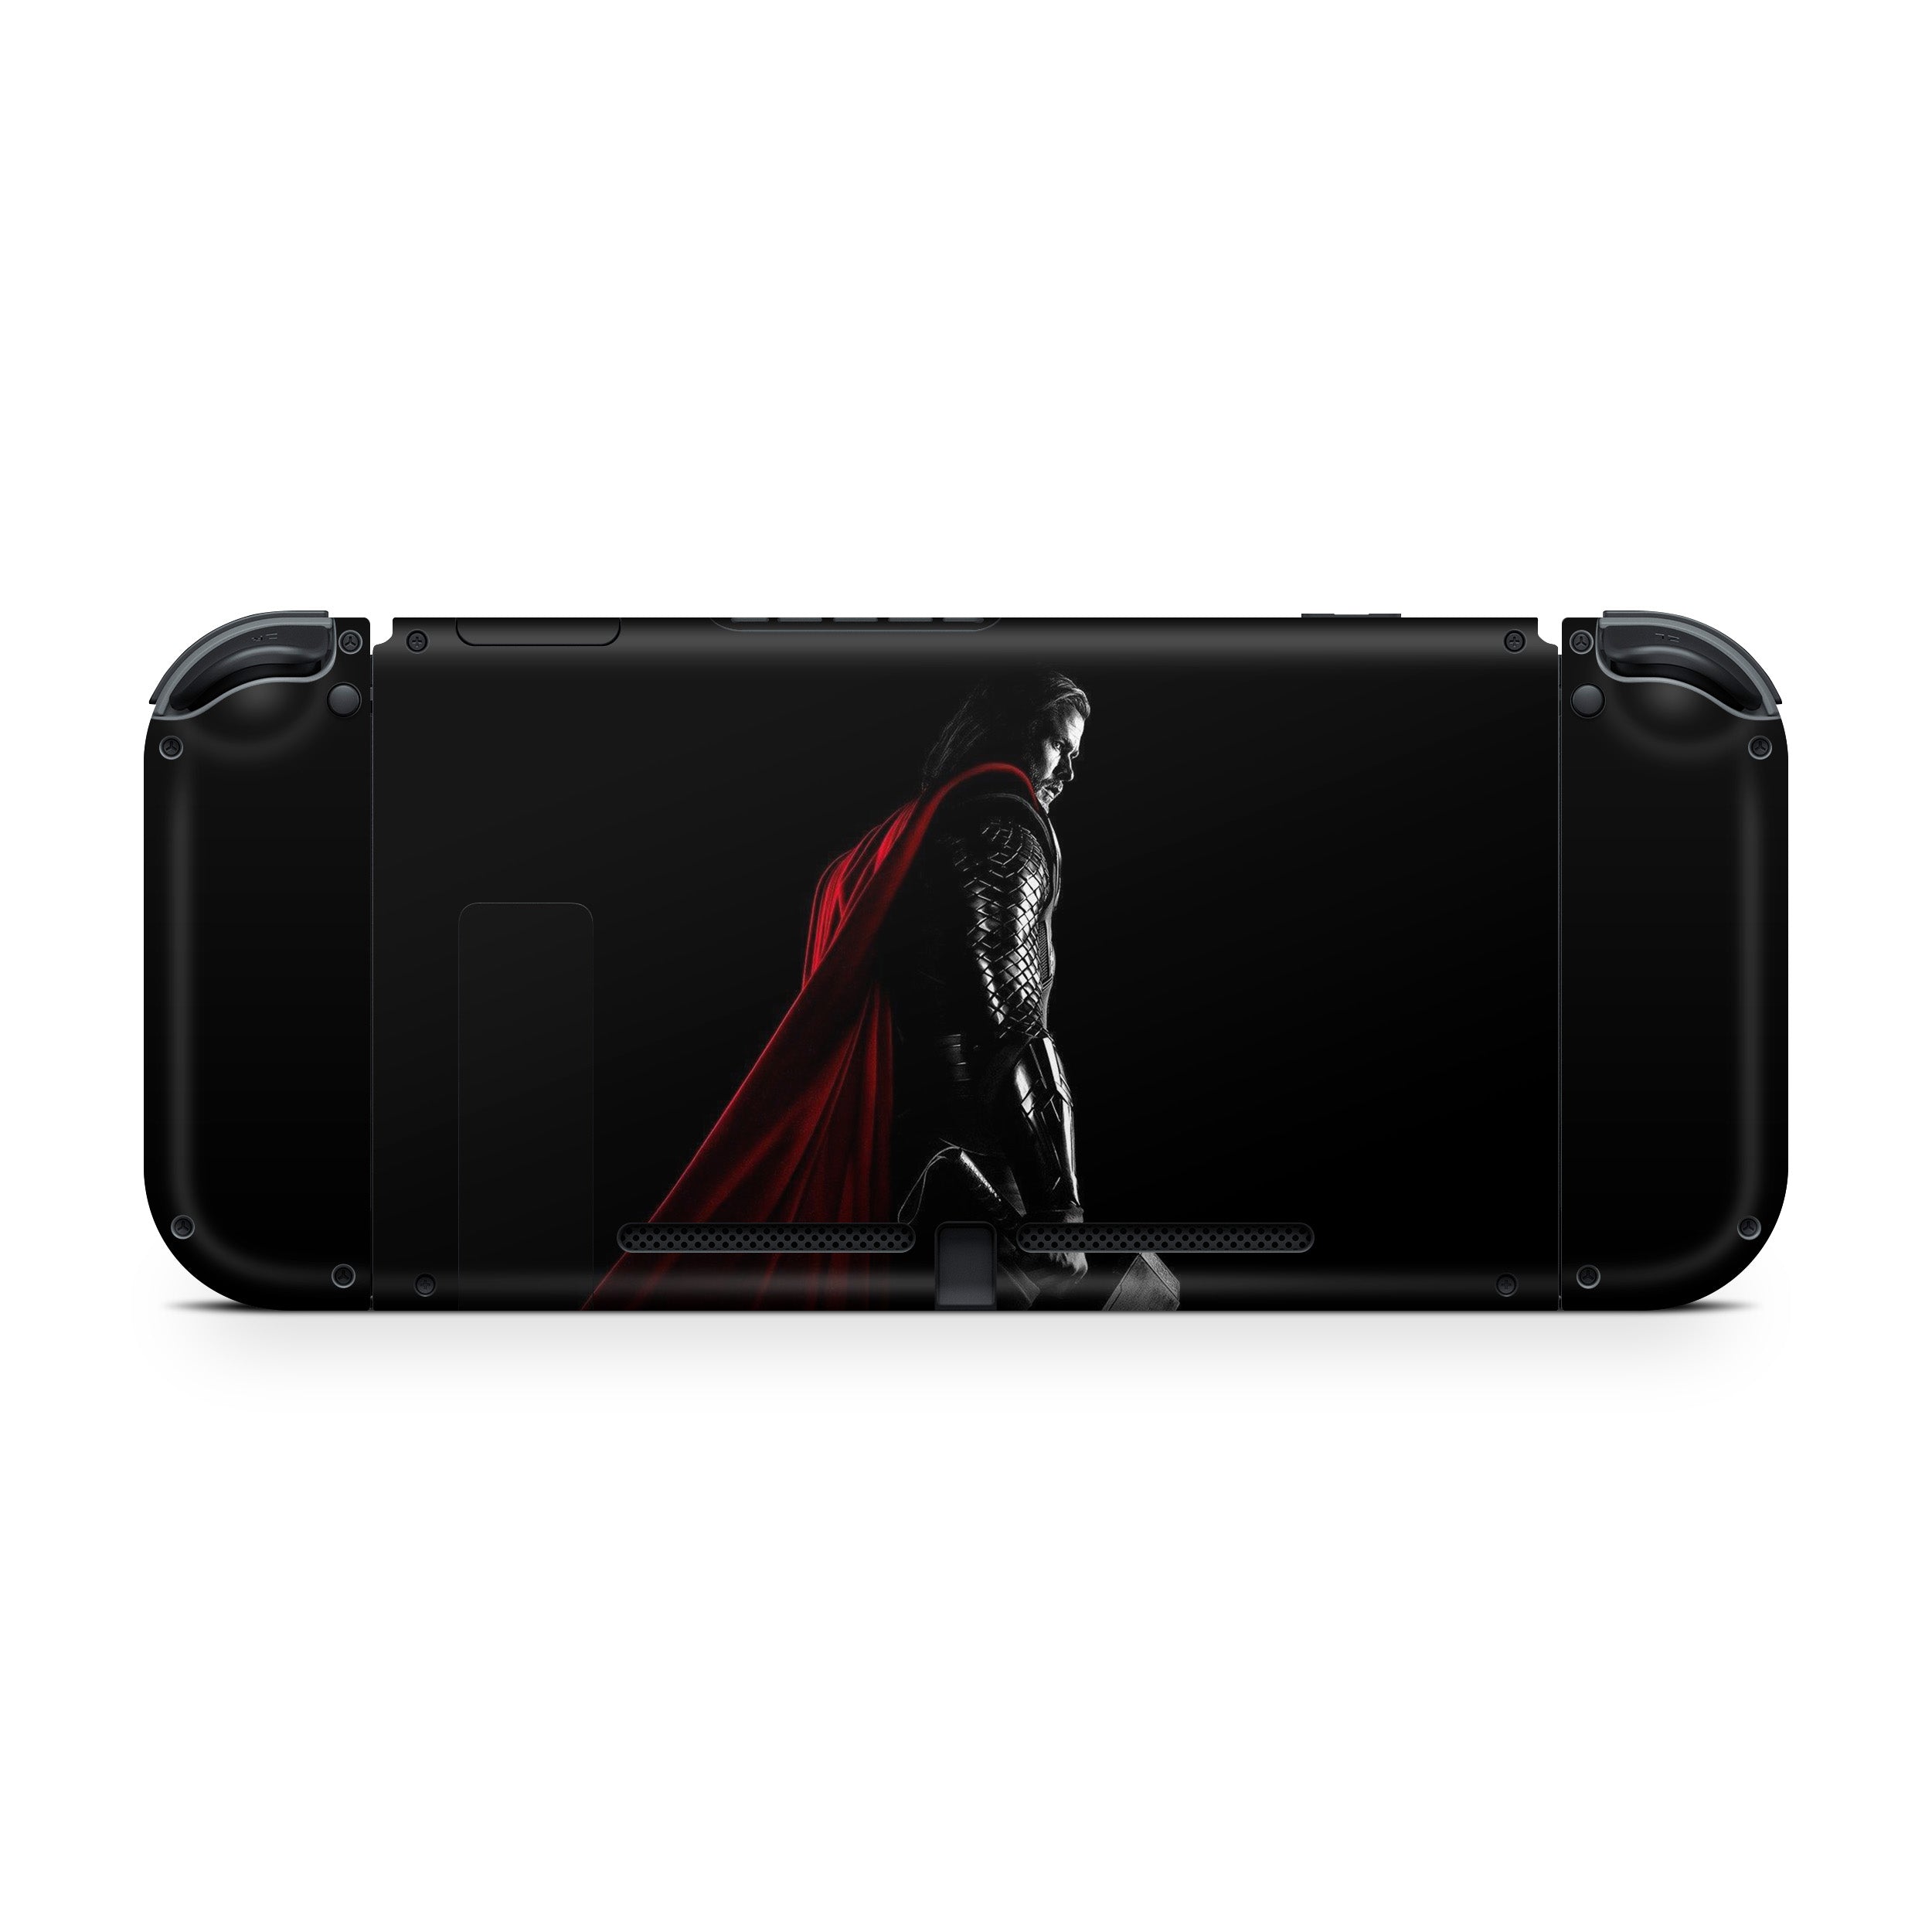 A video game skin featuring a Marvel Thor design for the Nintendo Switch.